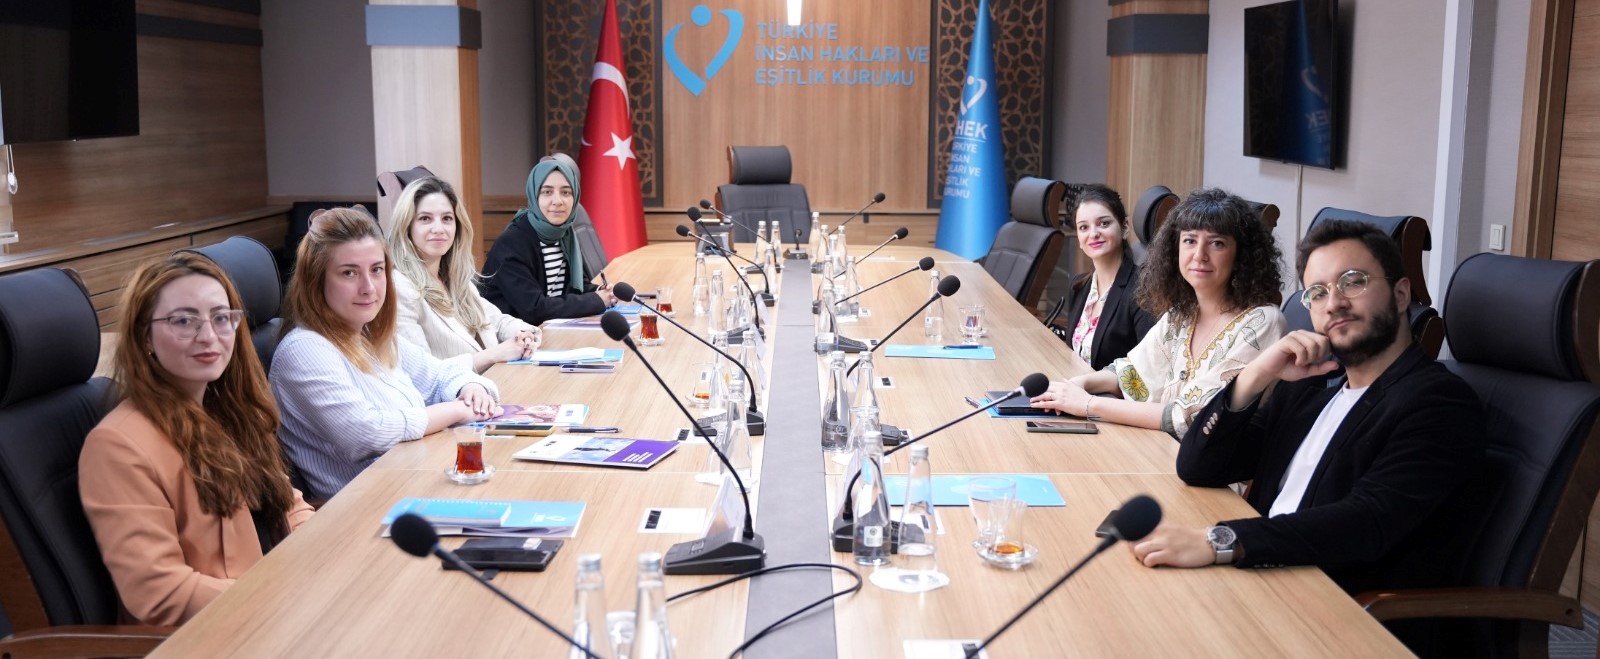 Visit to our Institution from the Council of Europe Ankara Program Office